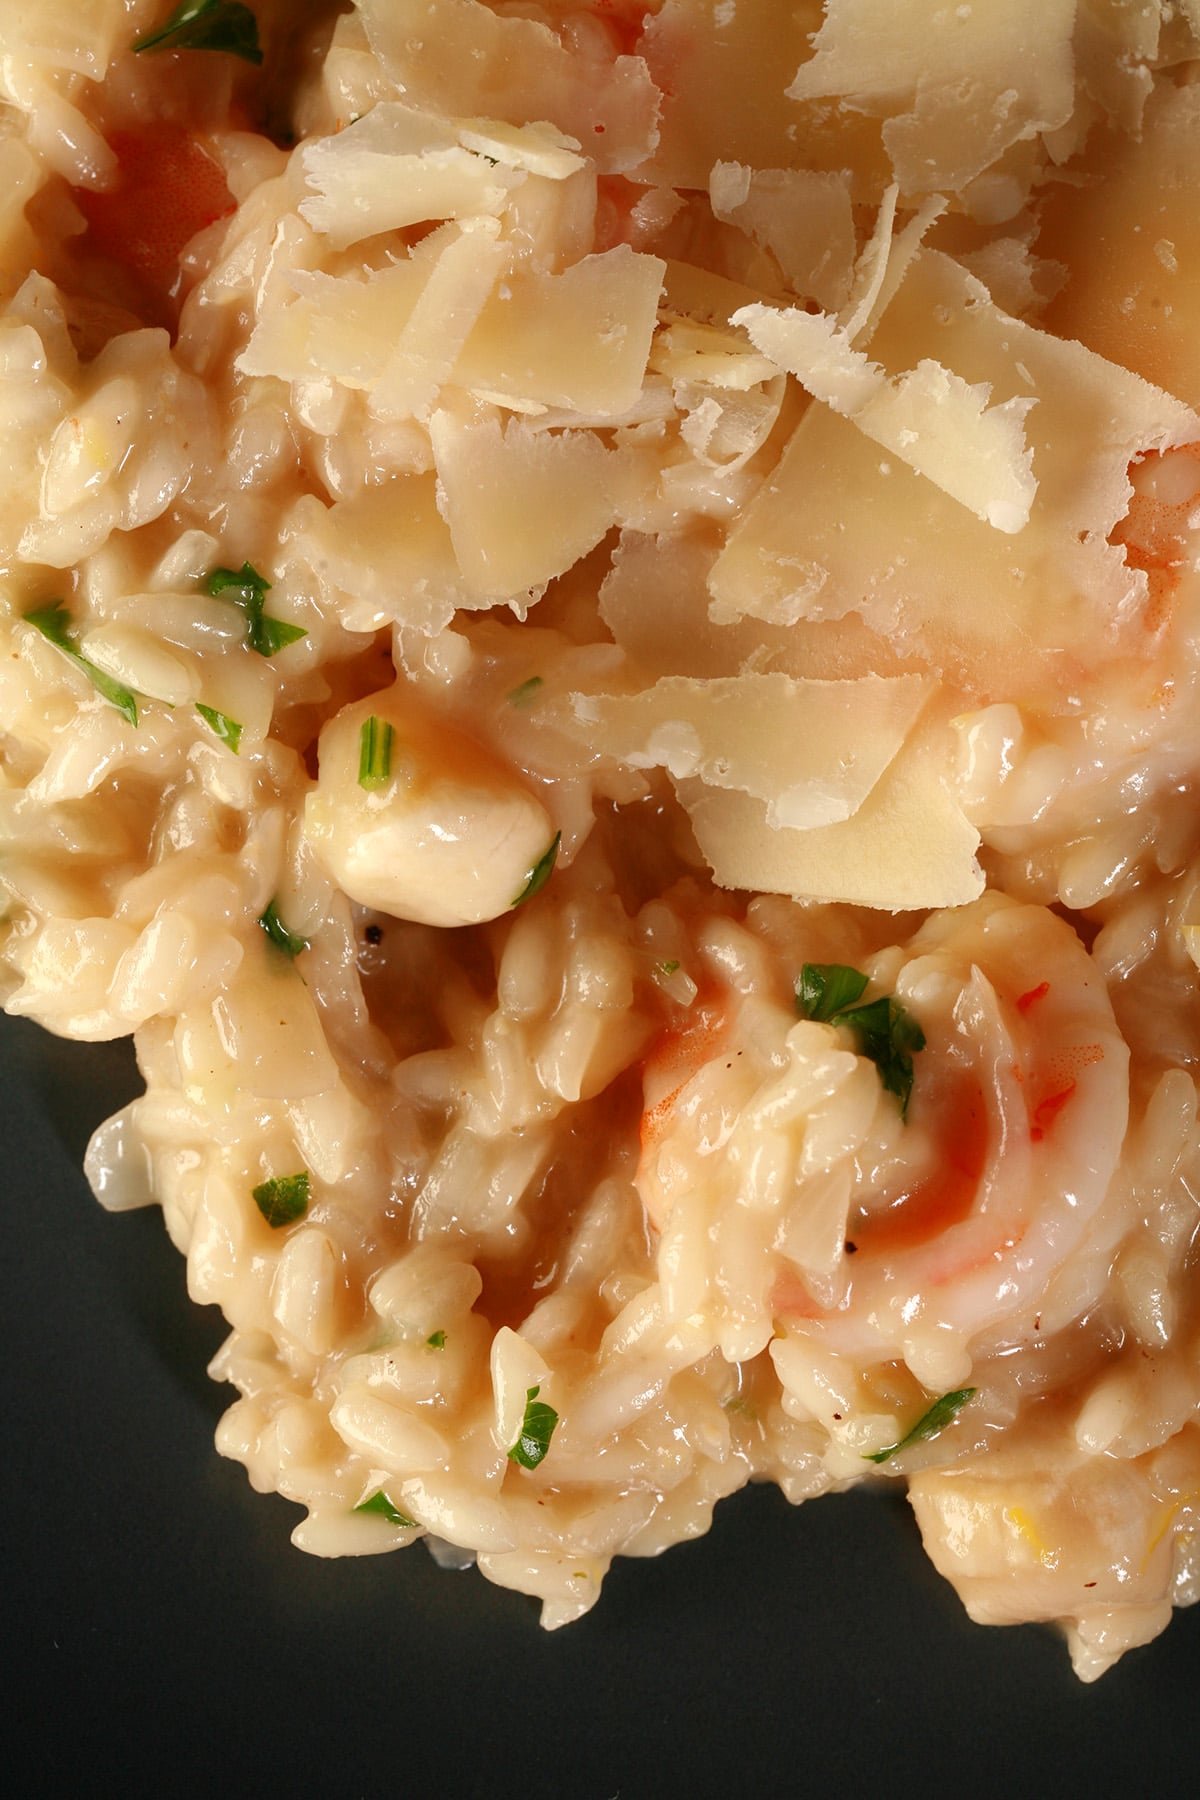 A close up view of seafood risotto on a plate.